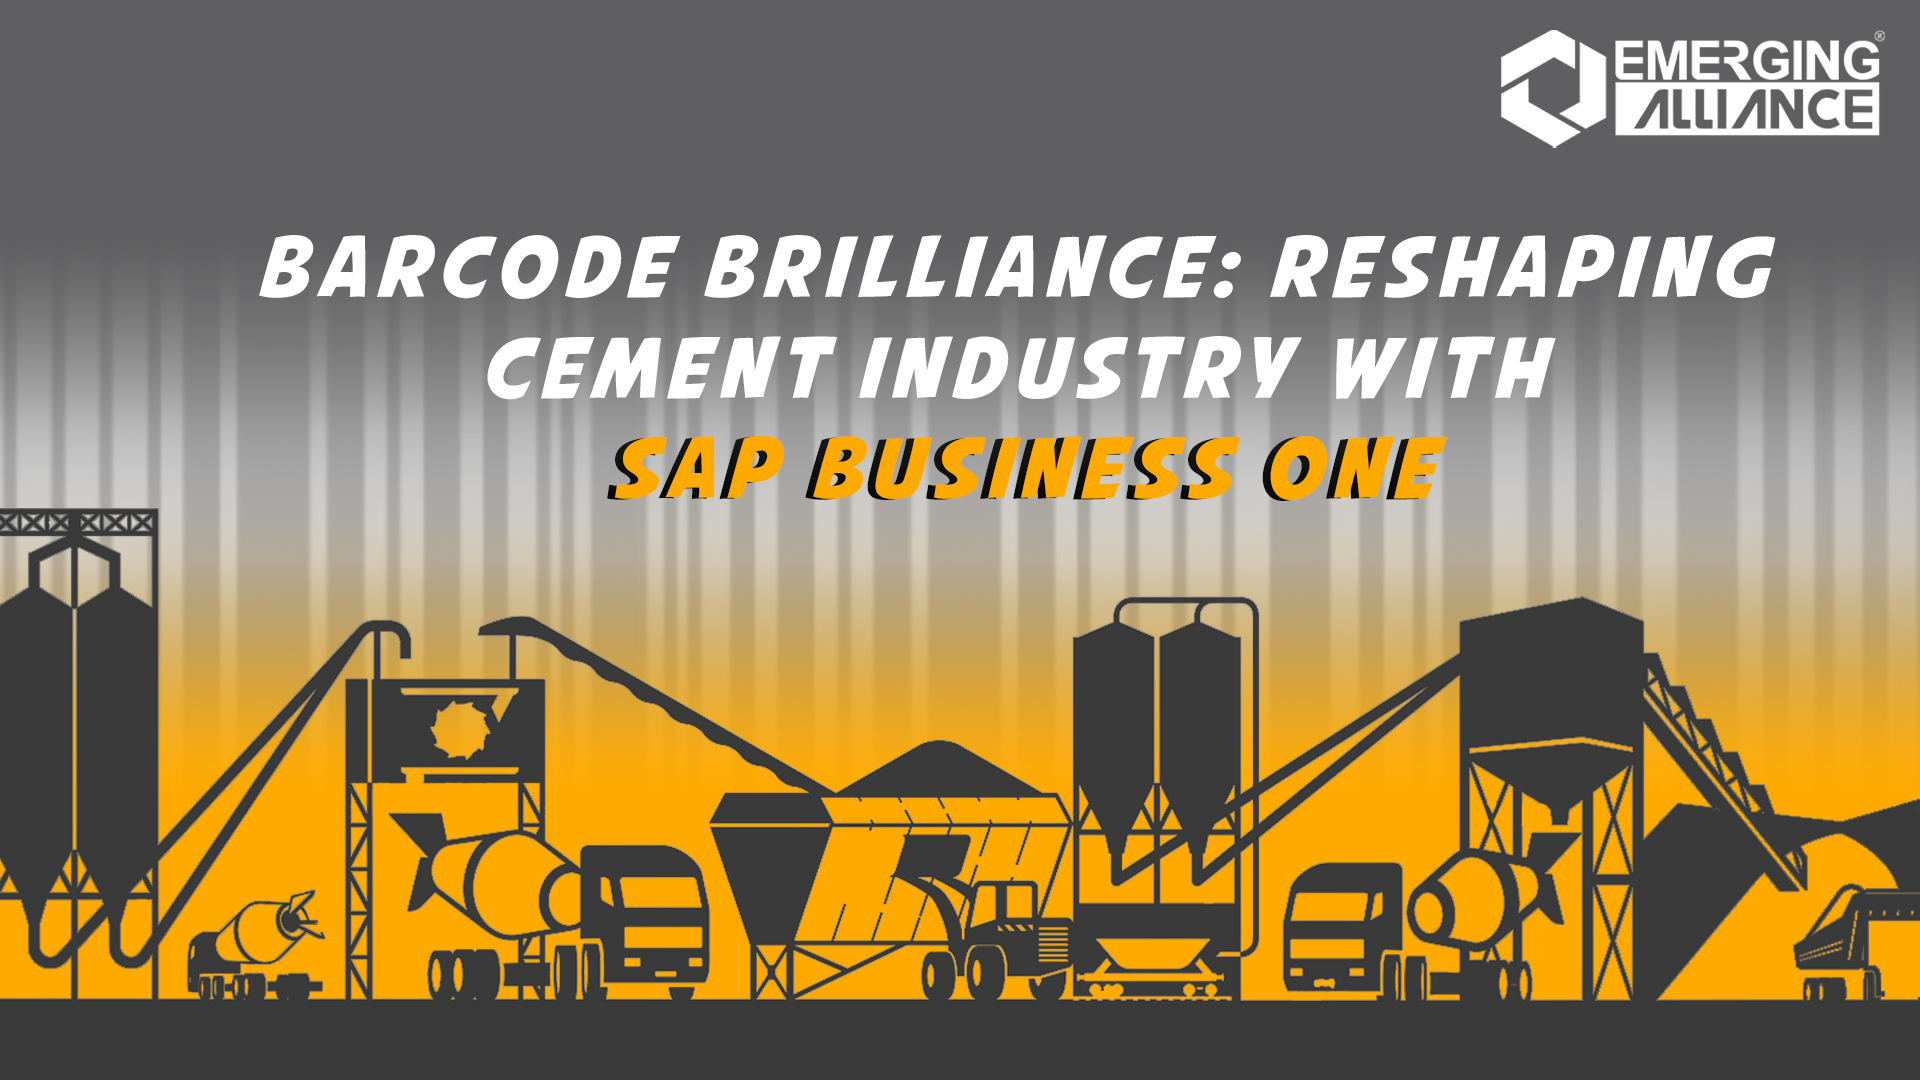 SAP Business One Barcode Brilliance for Cement Industry